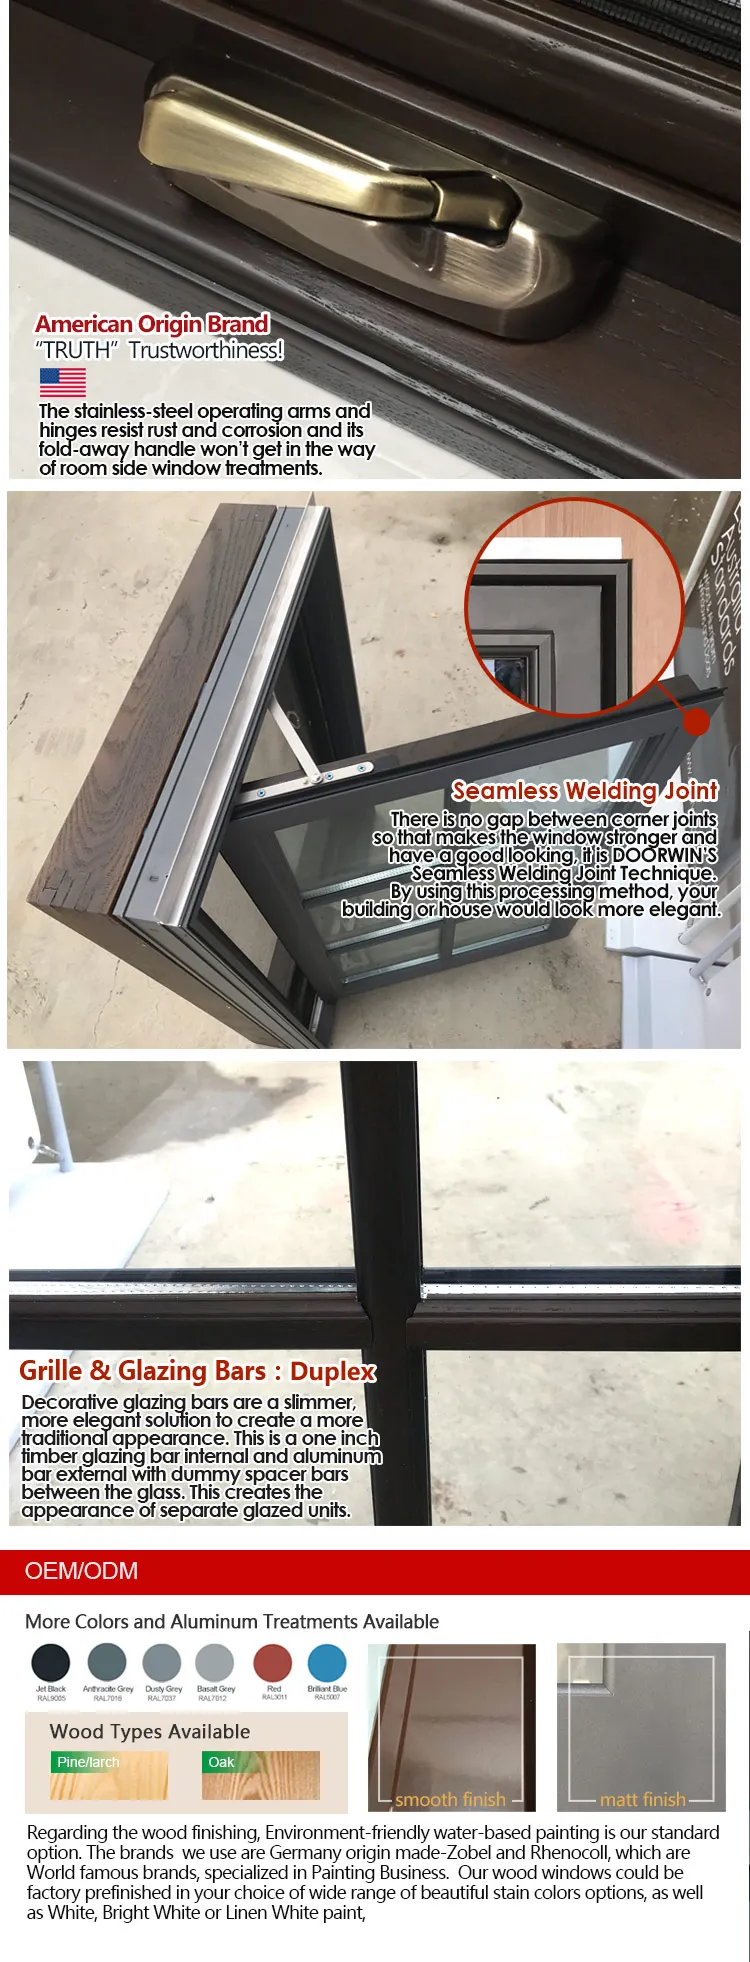 10 Year Warranty Energy Efficient USA NFRC Standard Fire Rated Aluminium tempered glass fixed Corner window